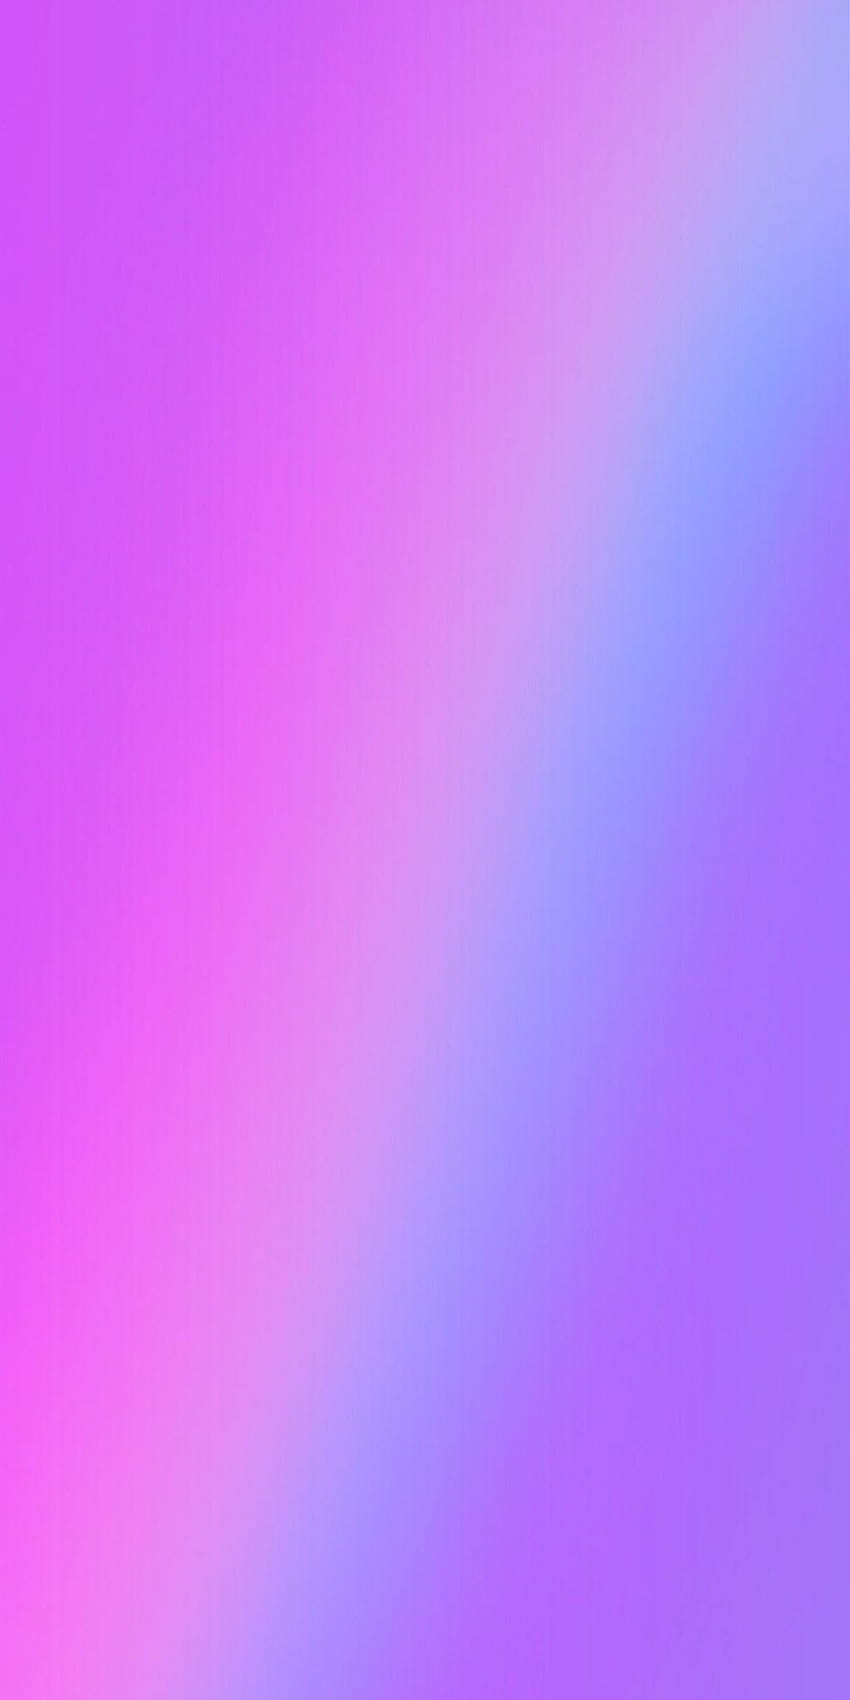 Rainbow Gradient . Sherwin williams paint colors, Solid color background, Hex colors HD phone wallpaper